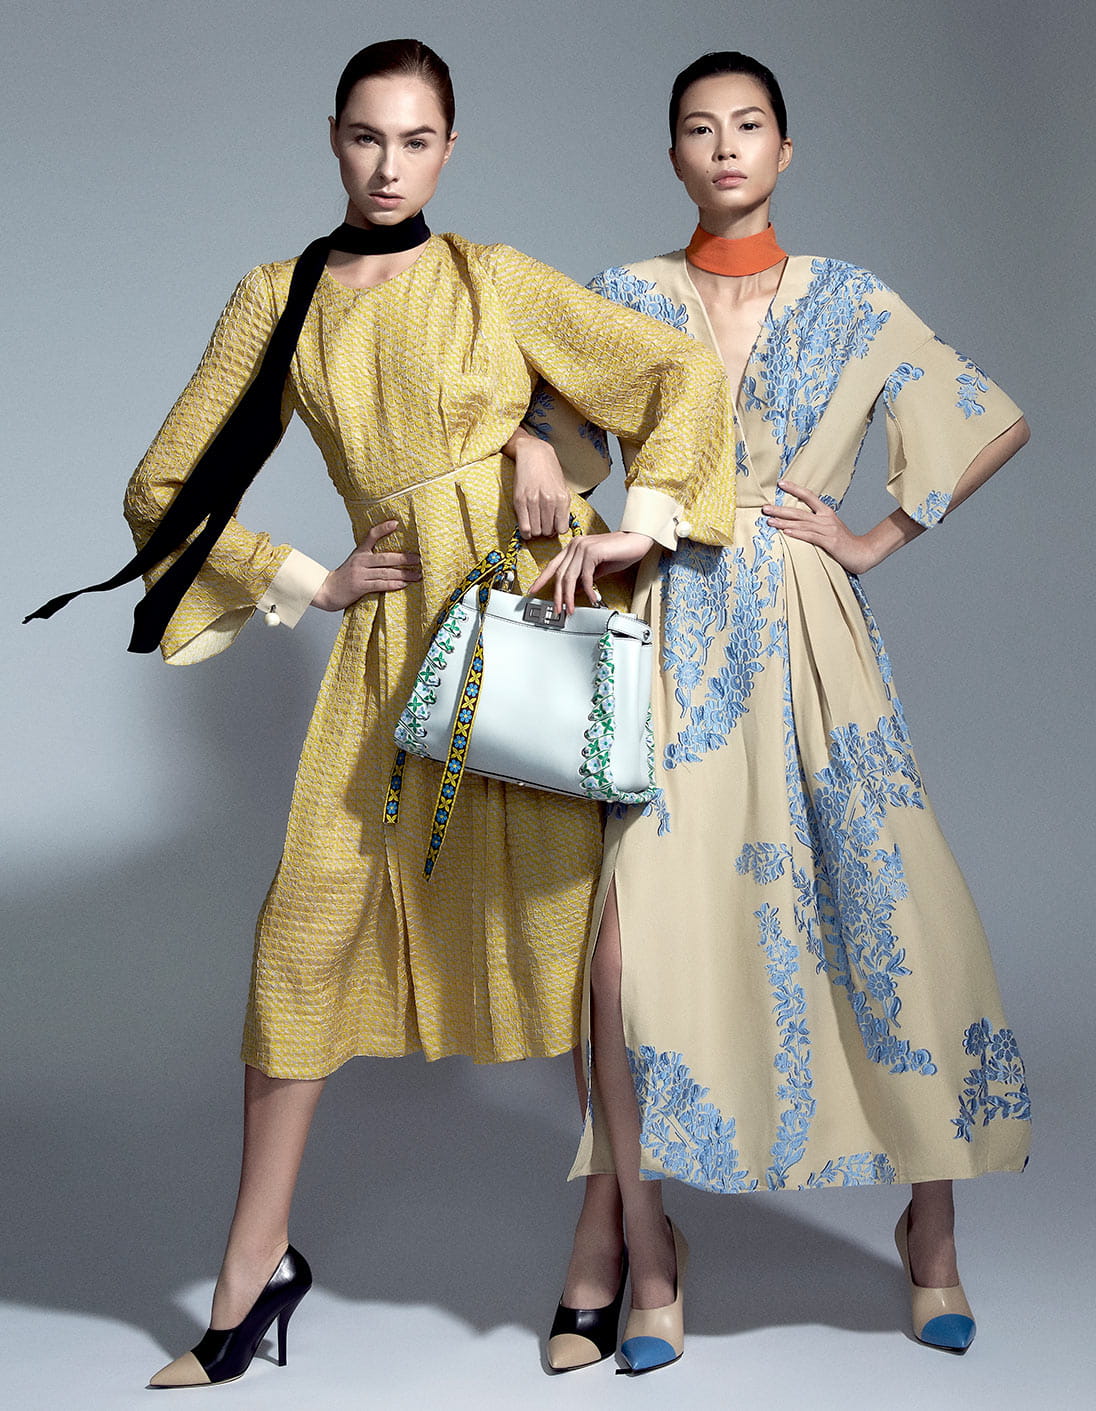 Two models pose together in head-to-toe Fendi looks